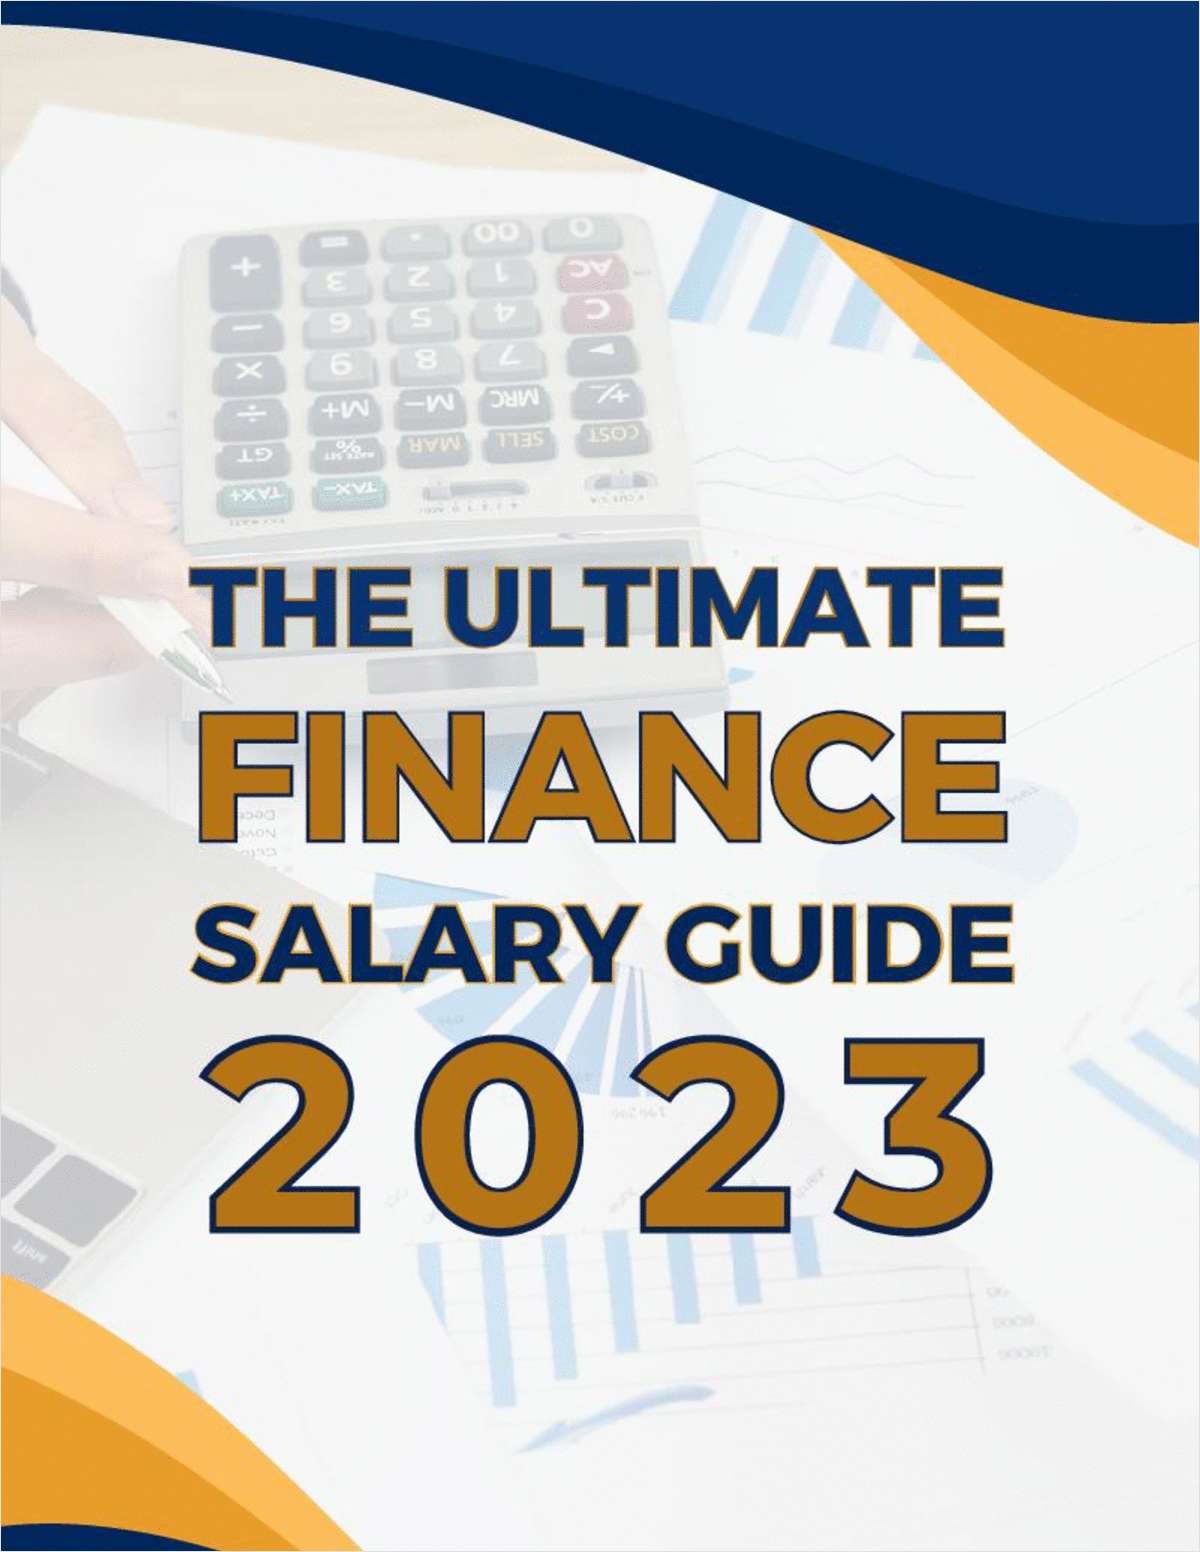 The Ultimate Finance Salary Guide 2023 Free eGuide